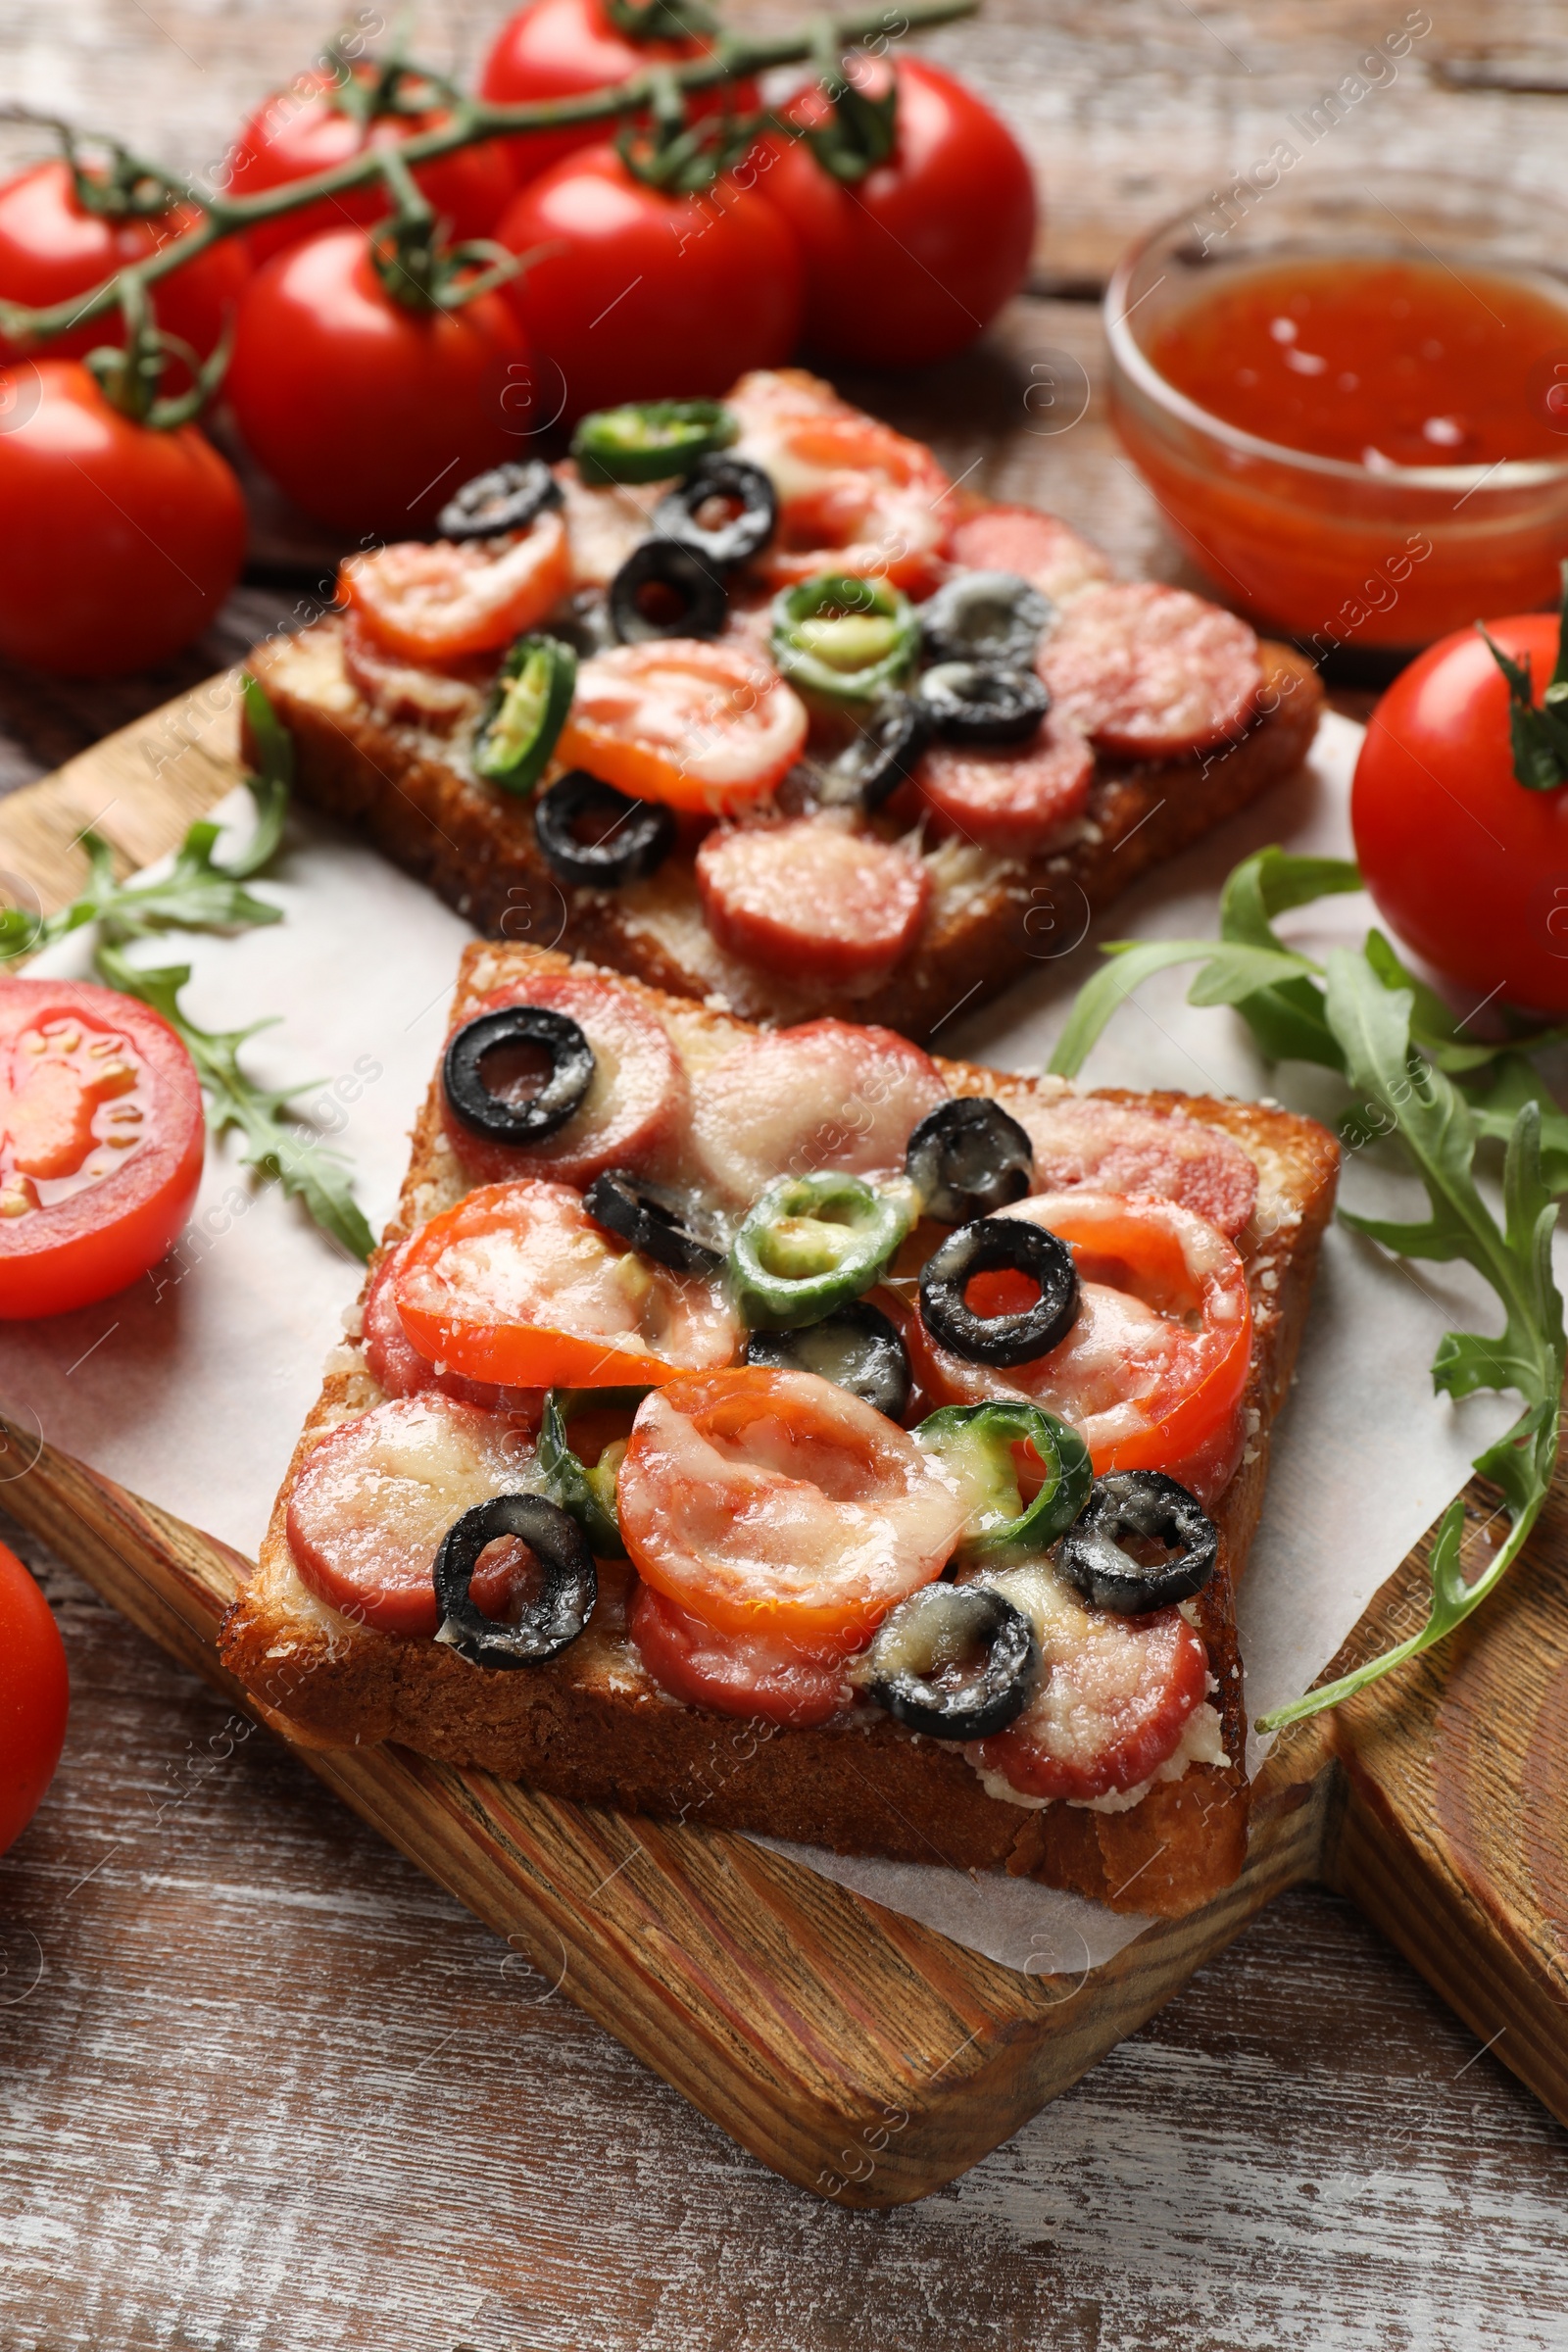 Photo of Tasty pizza toasts, sauce, tomatoes and arugula on wooden table